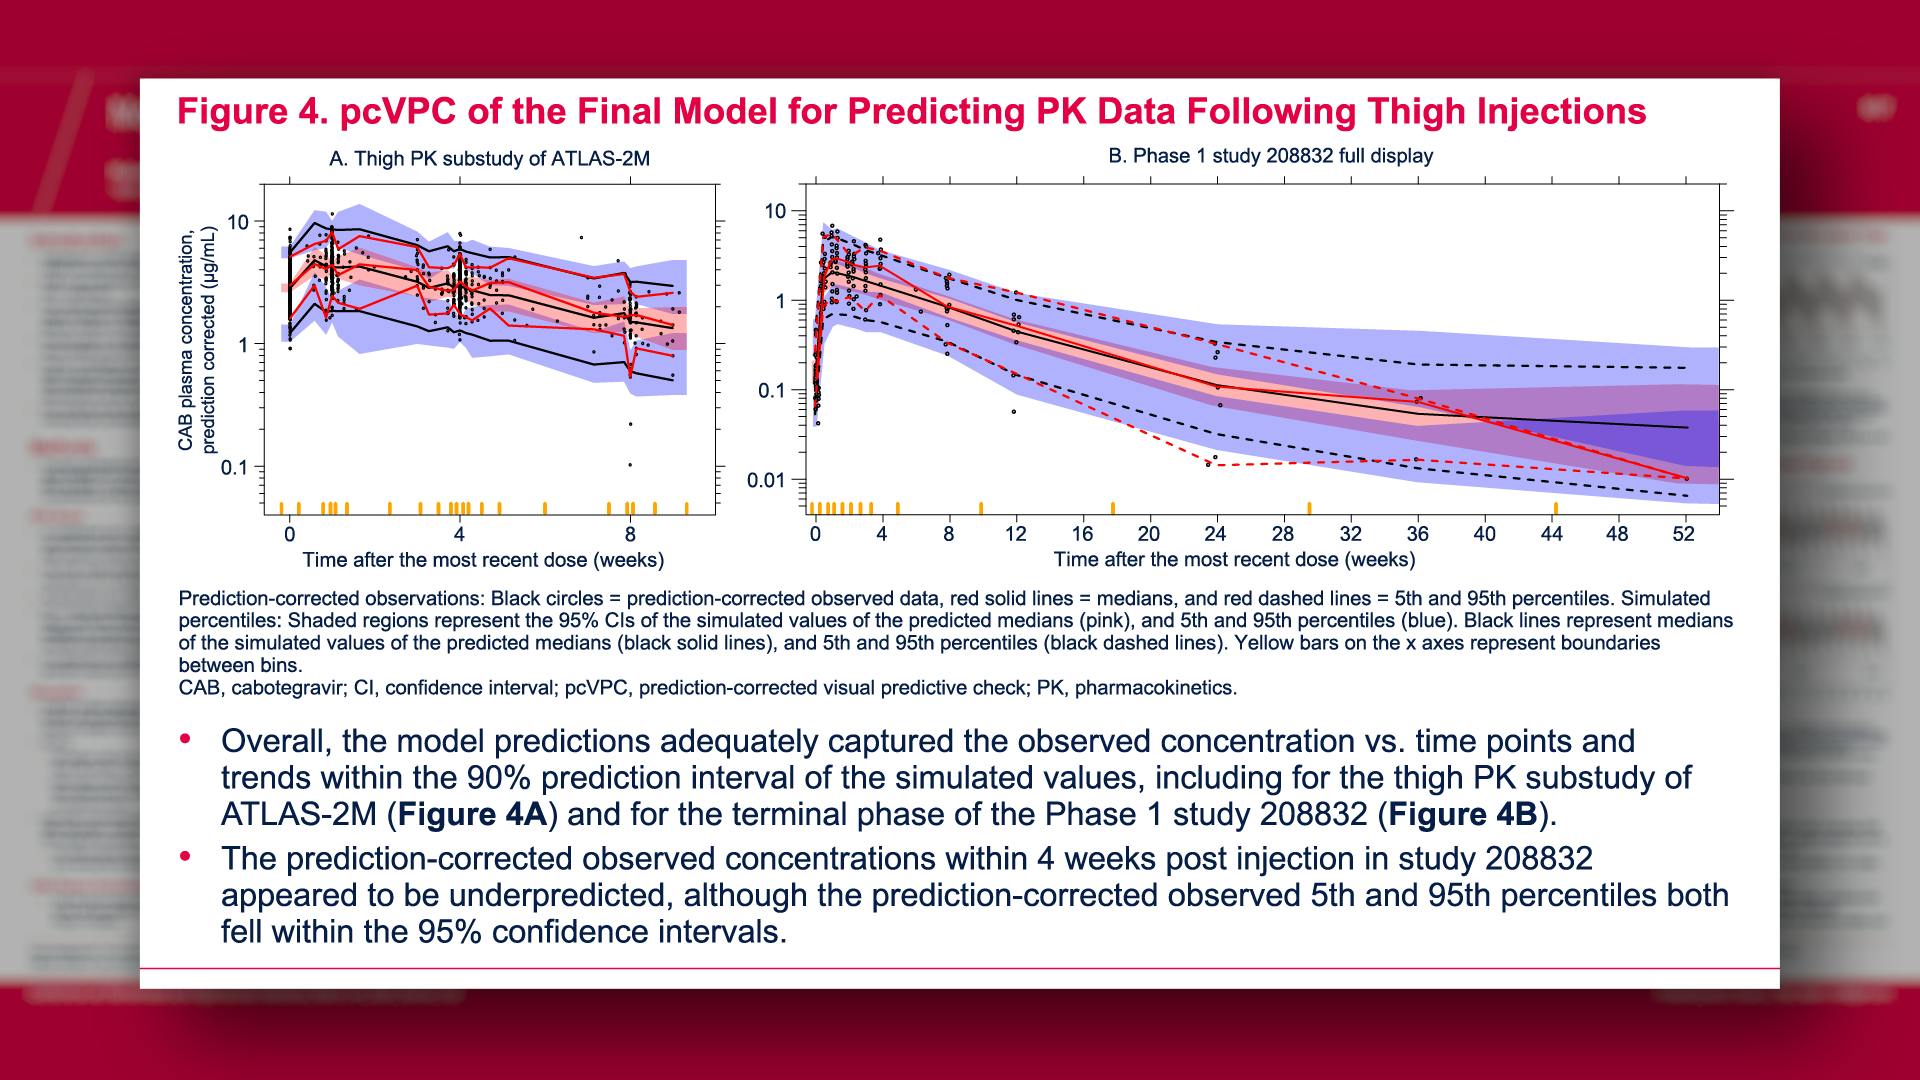 pcVPC of the Final Model for Predicting PK Data Following Thigh Injections